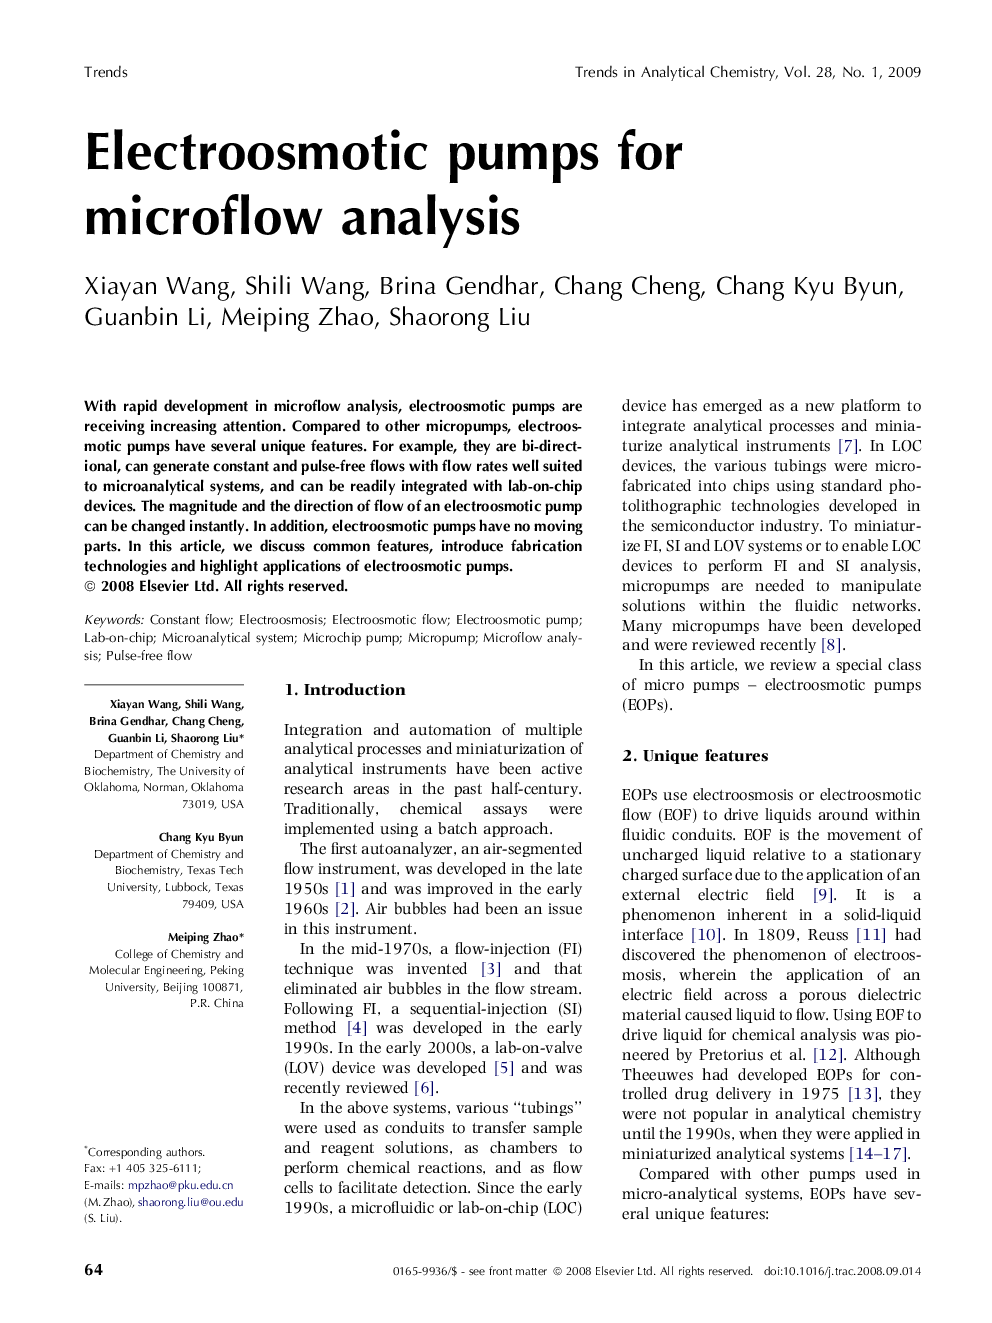 Electroosmotic pumps for microflow analysis